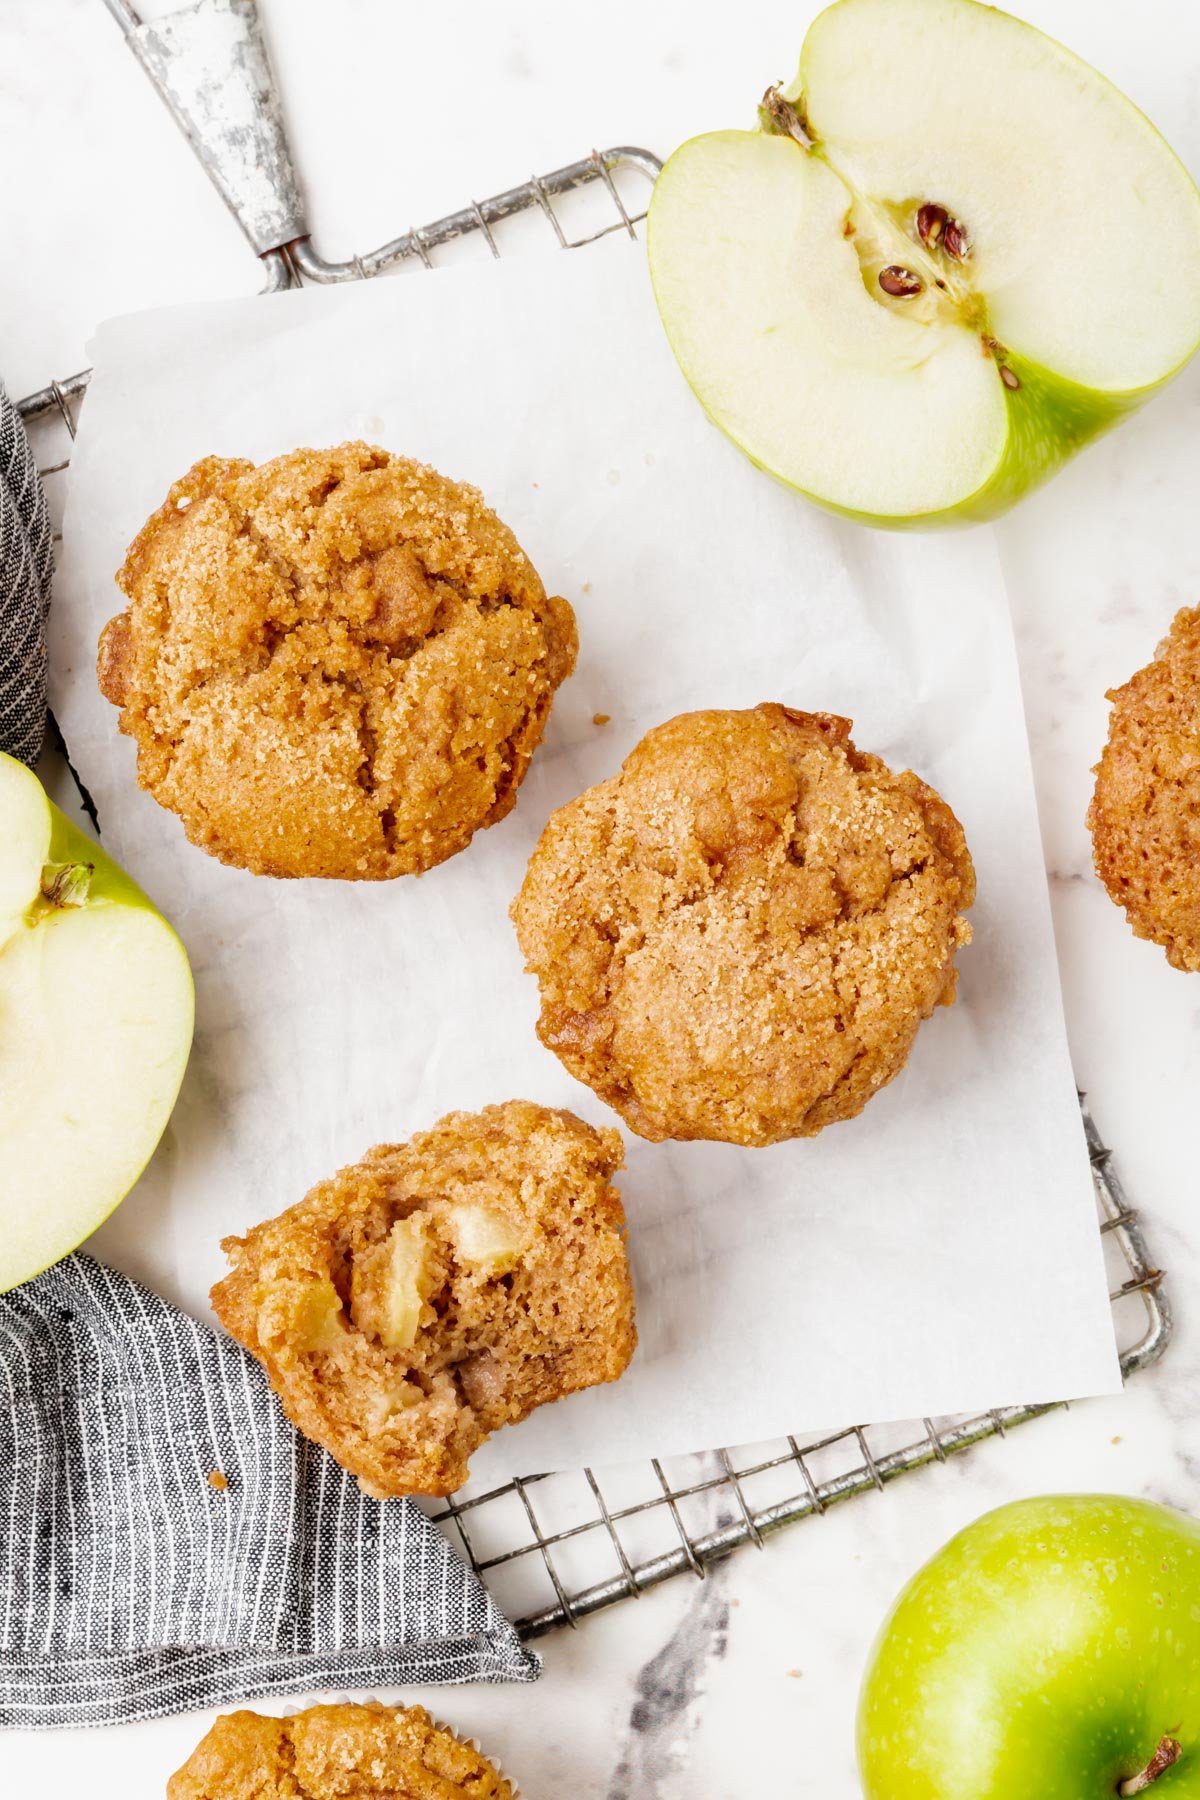 Gluten-free vegan apple cinnamon muffins on a table with green apples.